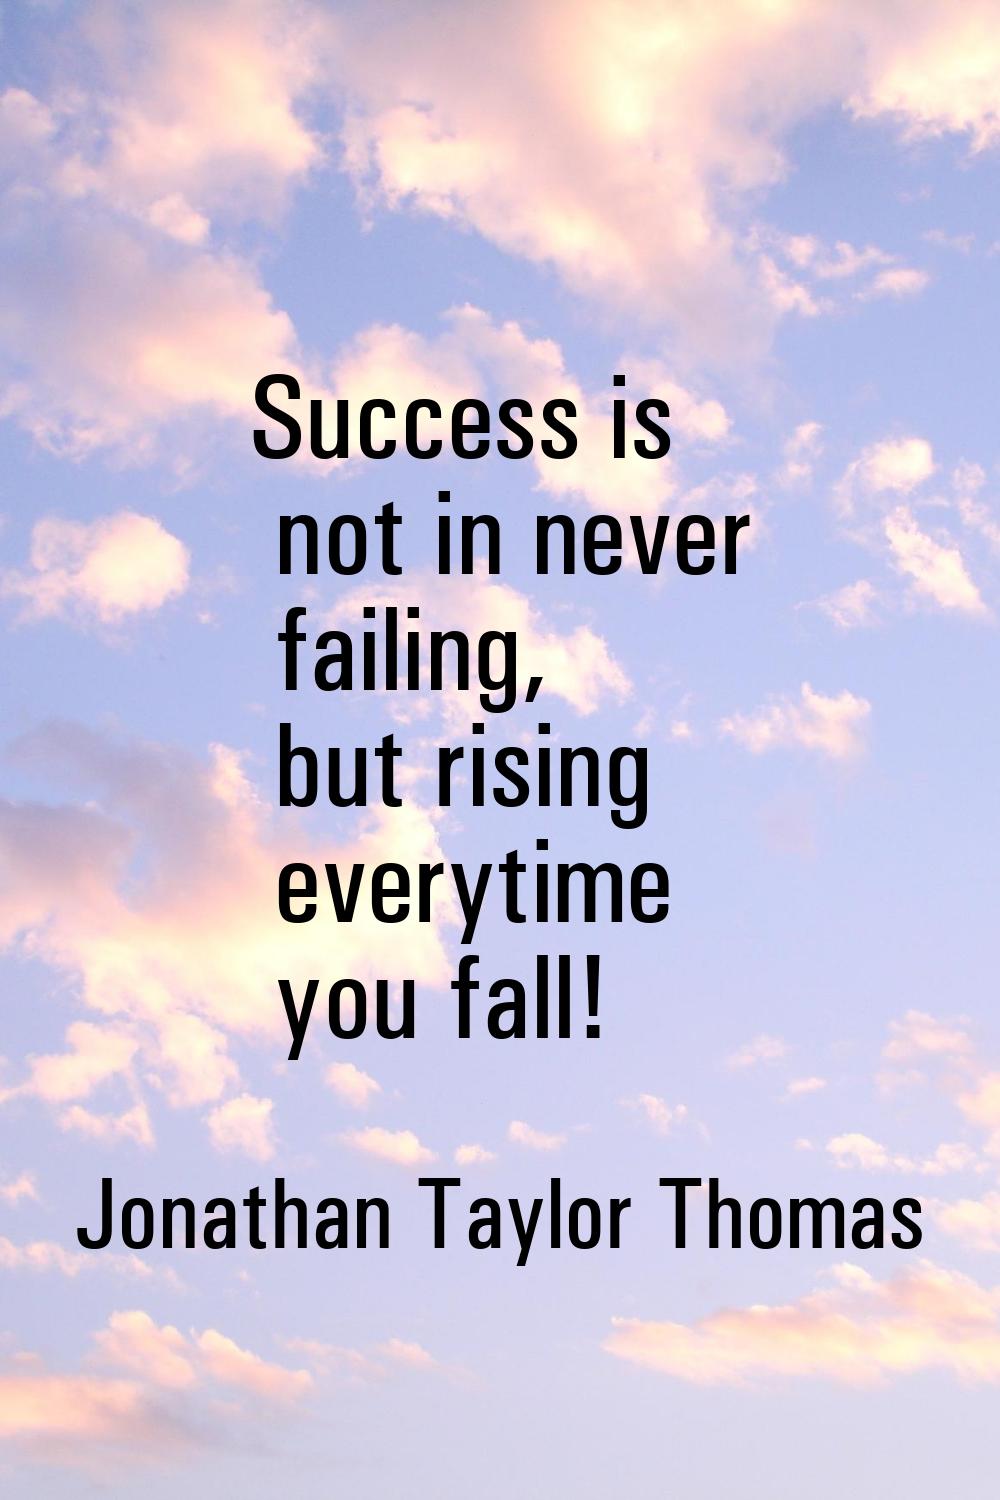 Success is not in never failing, but rising everytime you fall!